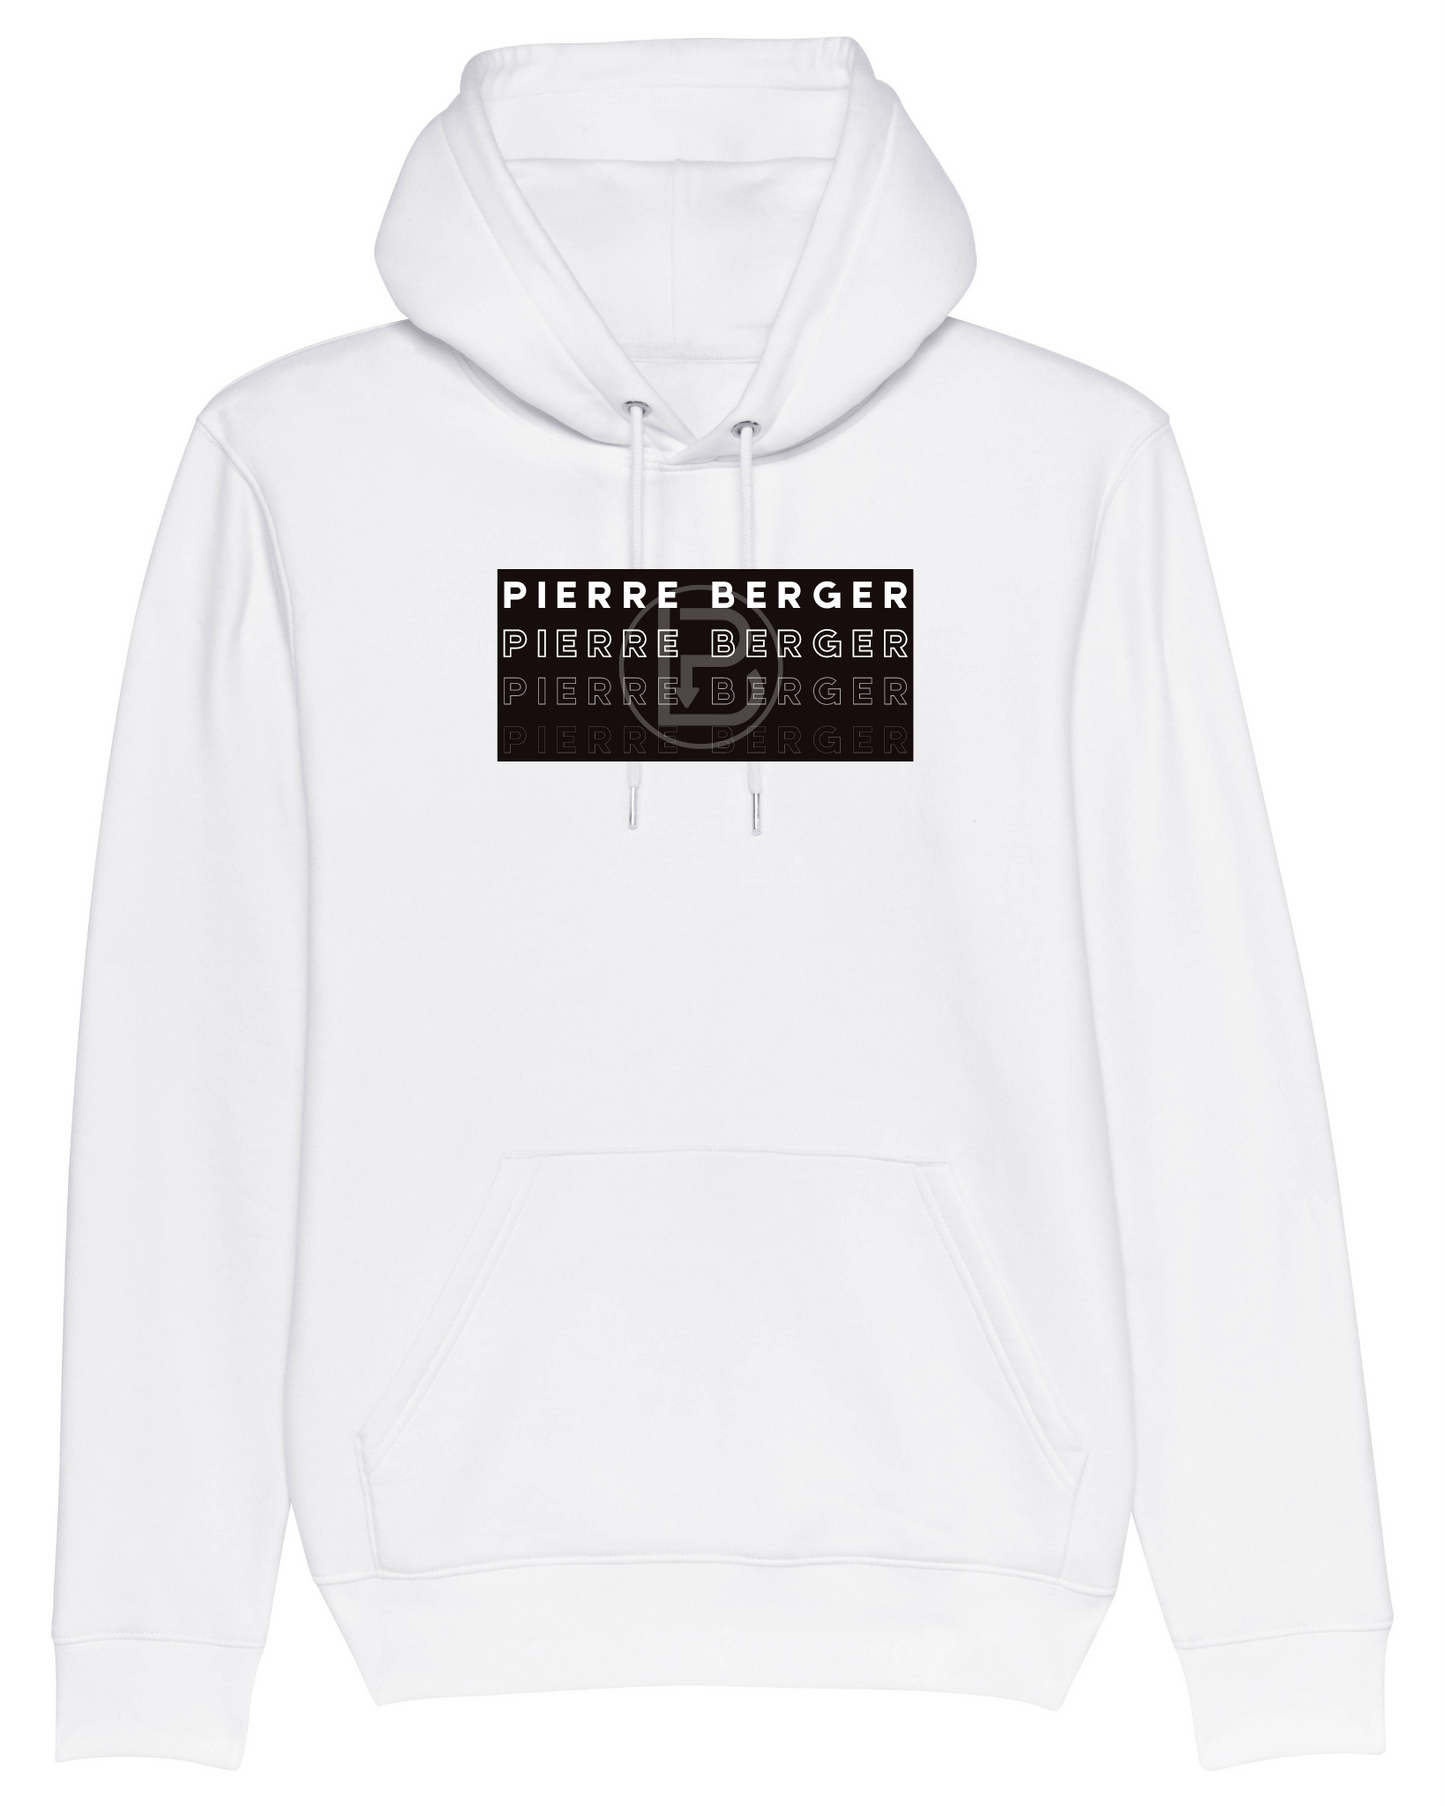 PIERRE BERGER - Unisex Hoodie Black White Simple Typhography 100% recycled